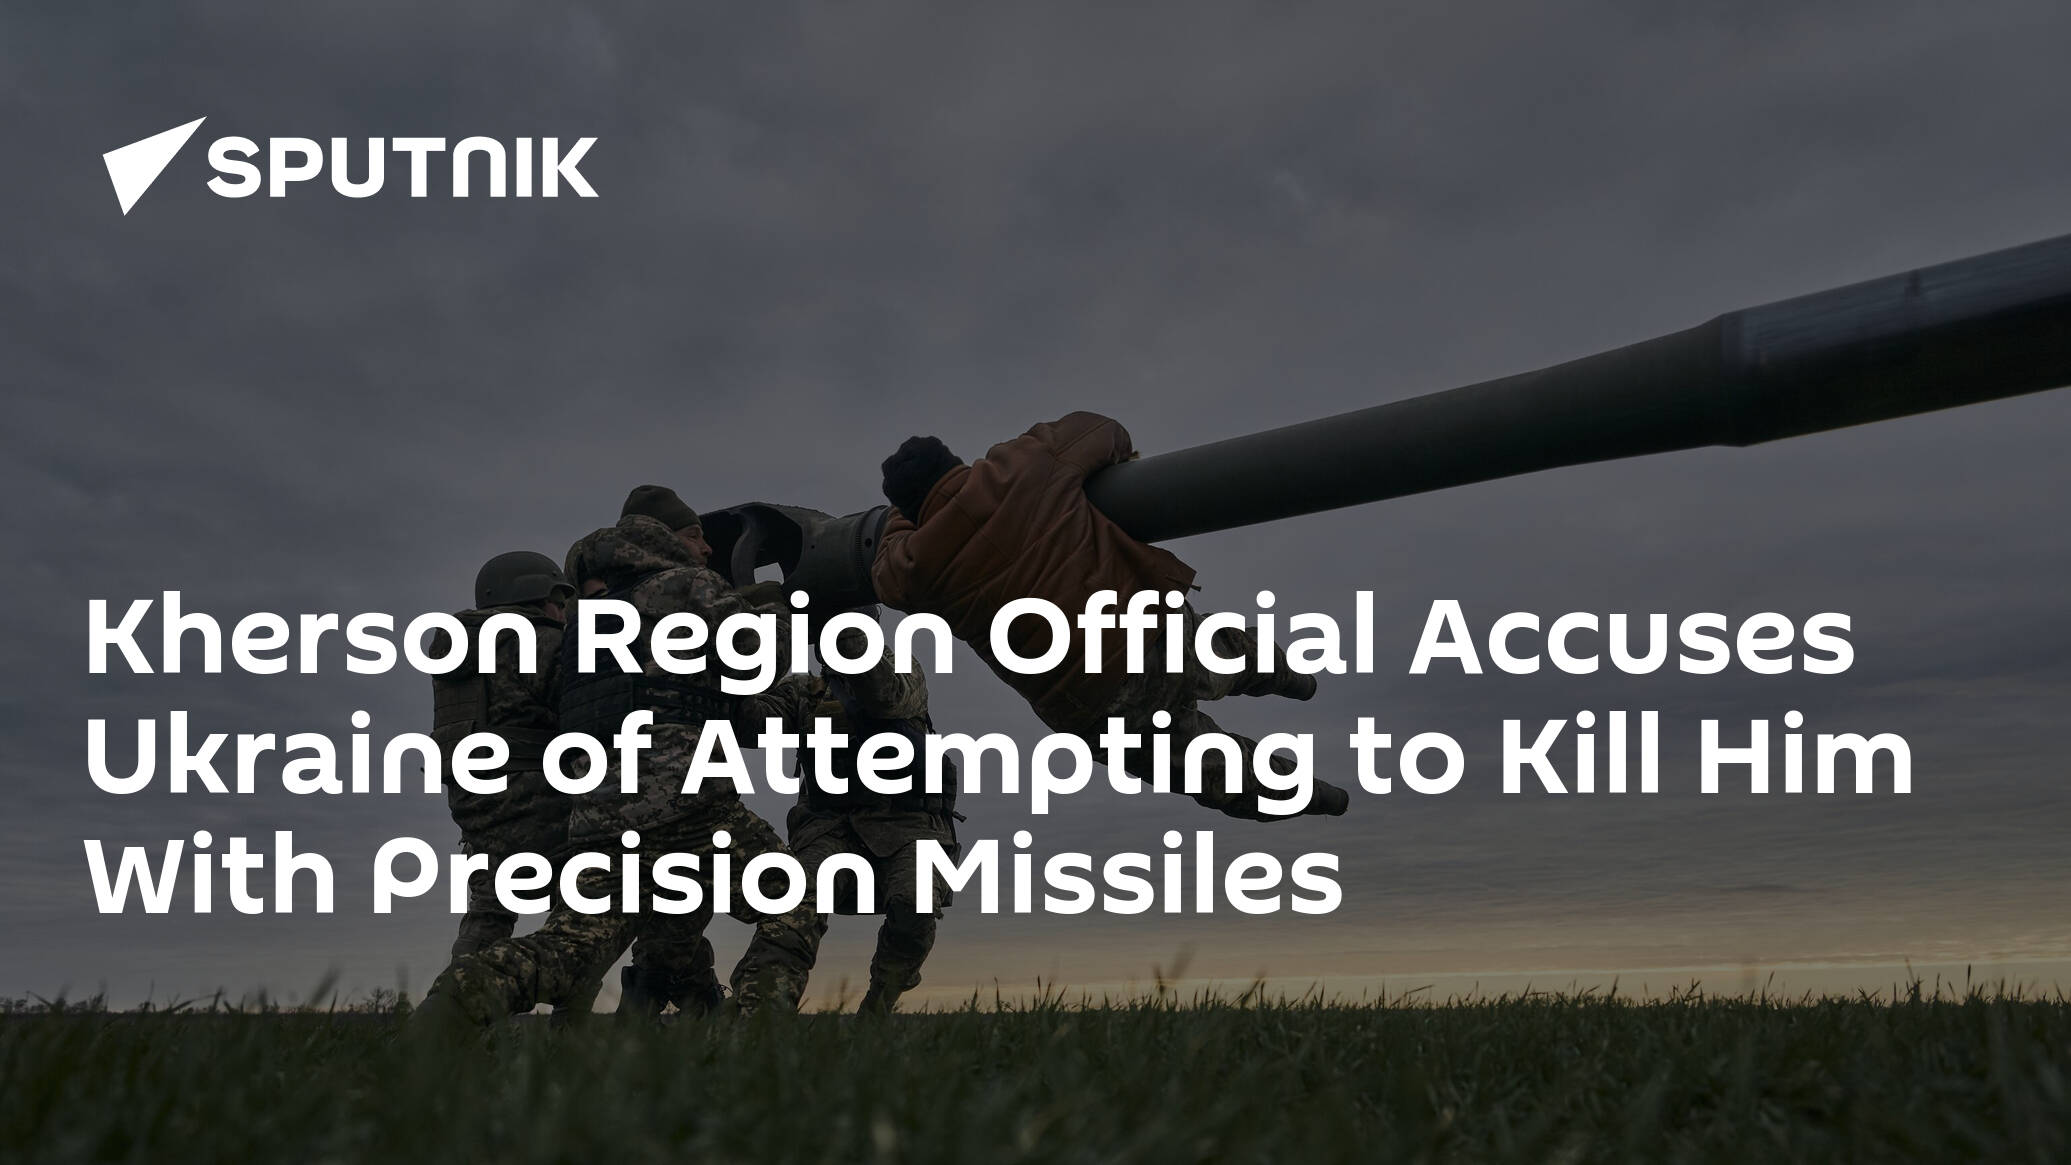 Kherson Region Official Accuses Ukraine of Attempting to Kill Him With Precision Missiles